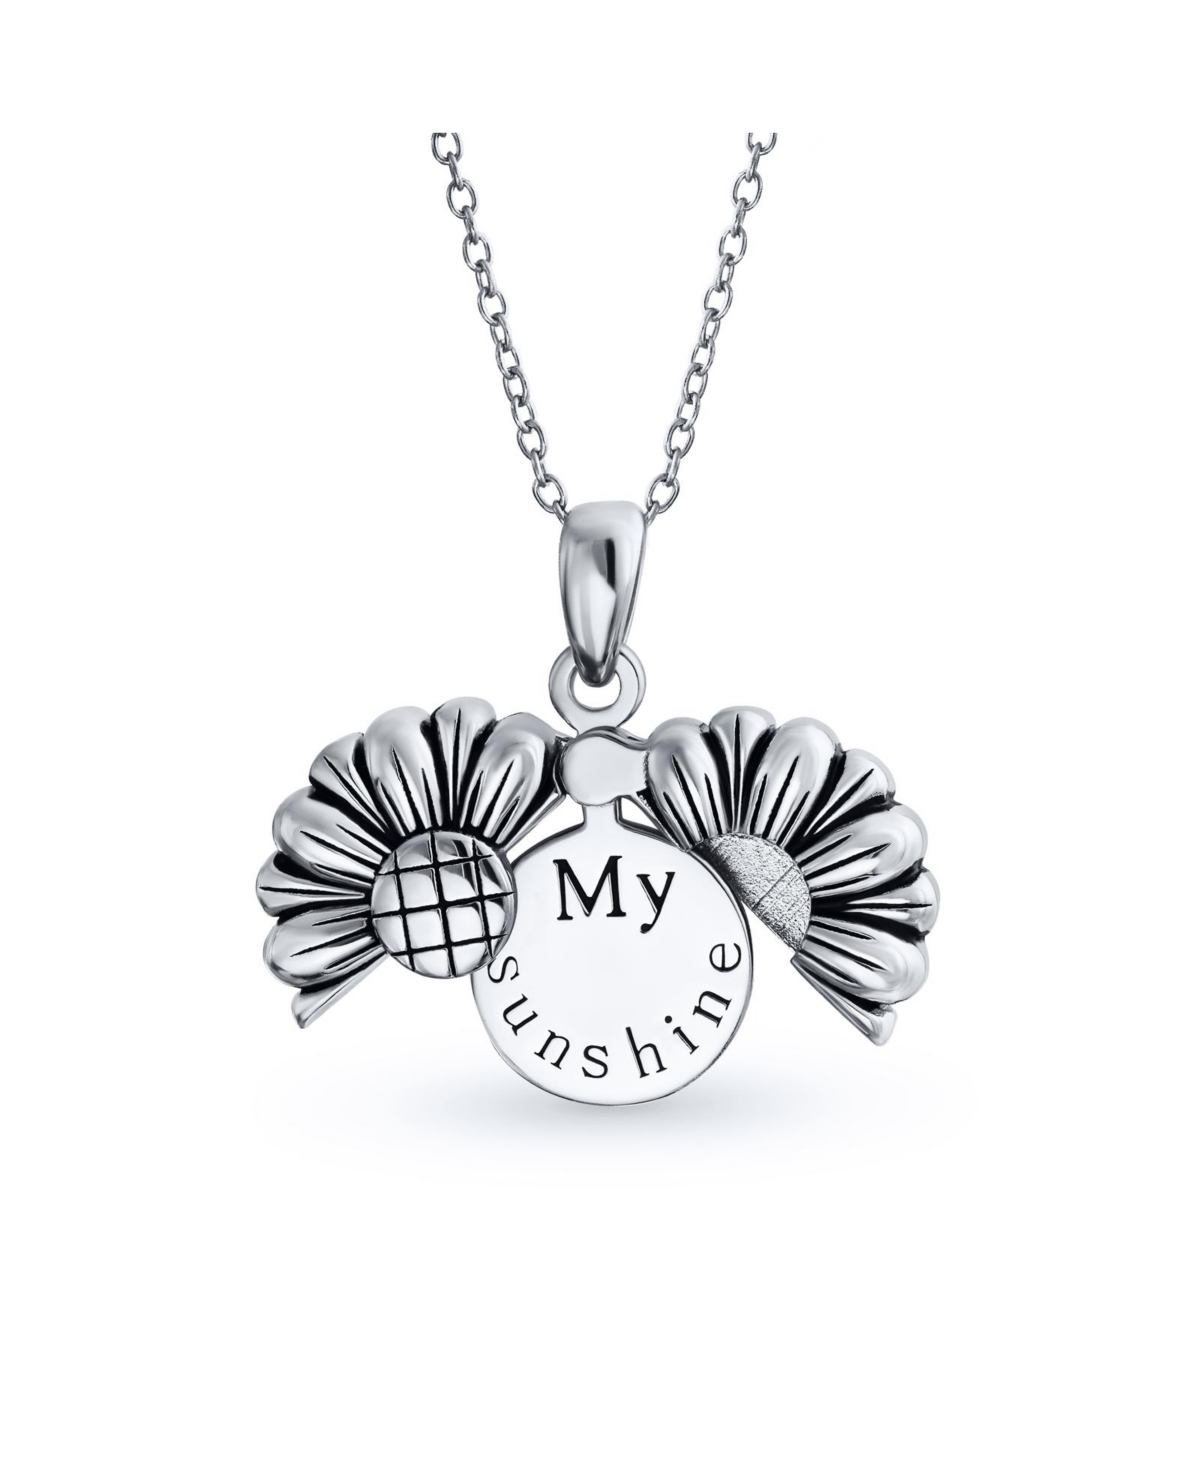 Personalize Floral Flower Inspirational Saying My Sunshine Words Sunflower Open Locket Pendant Necklace Girlfriend Rhodium Plated Sterli